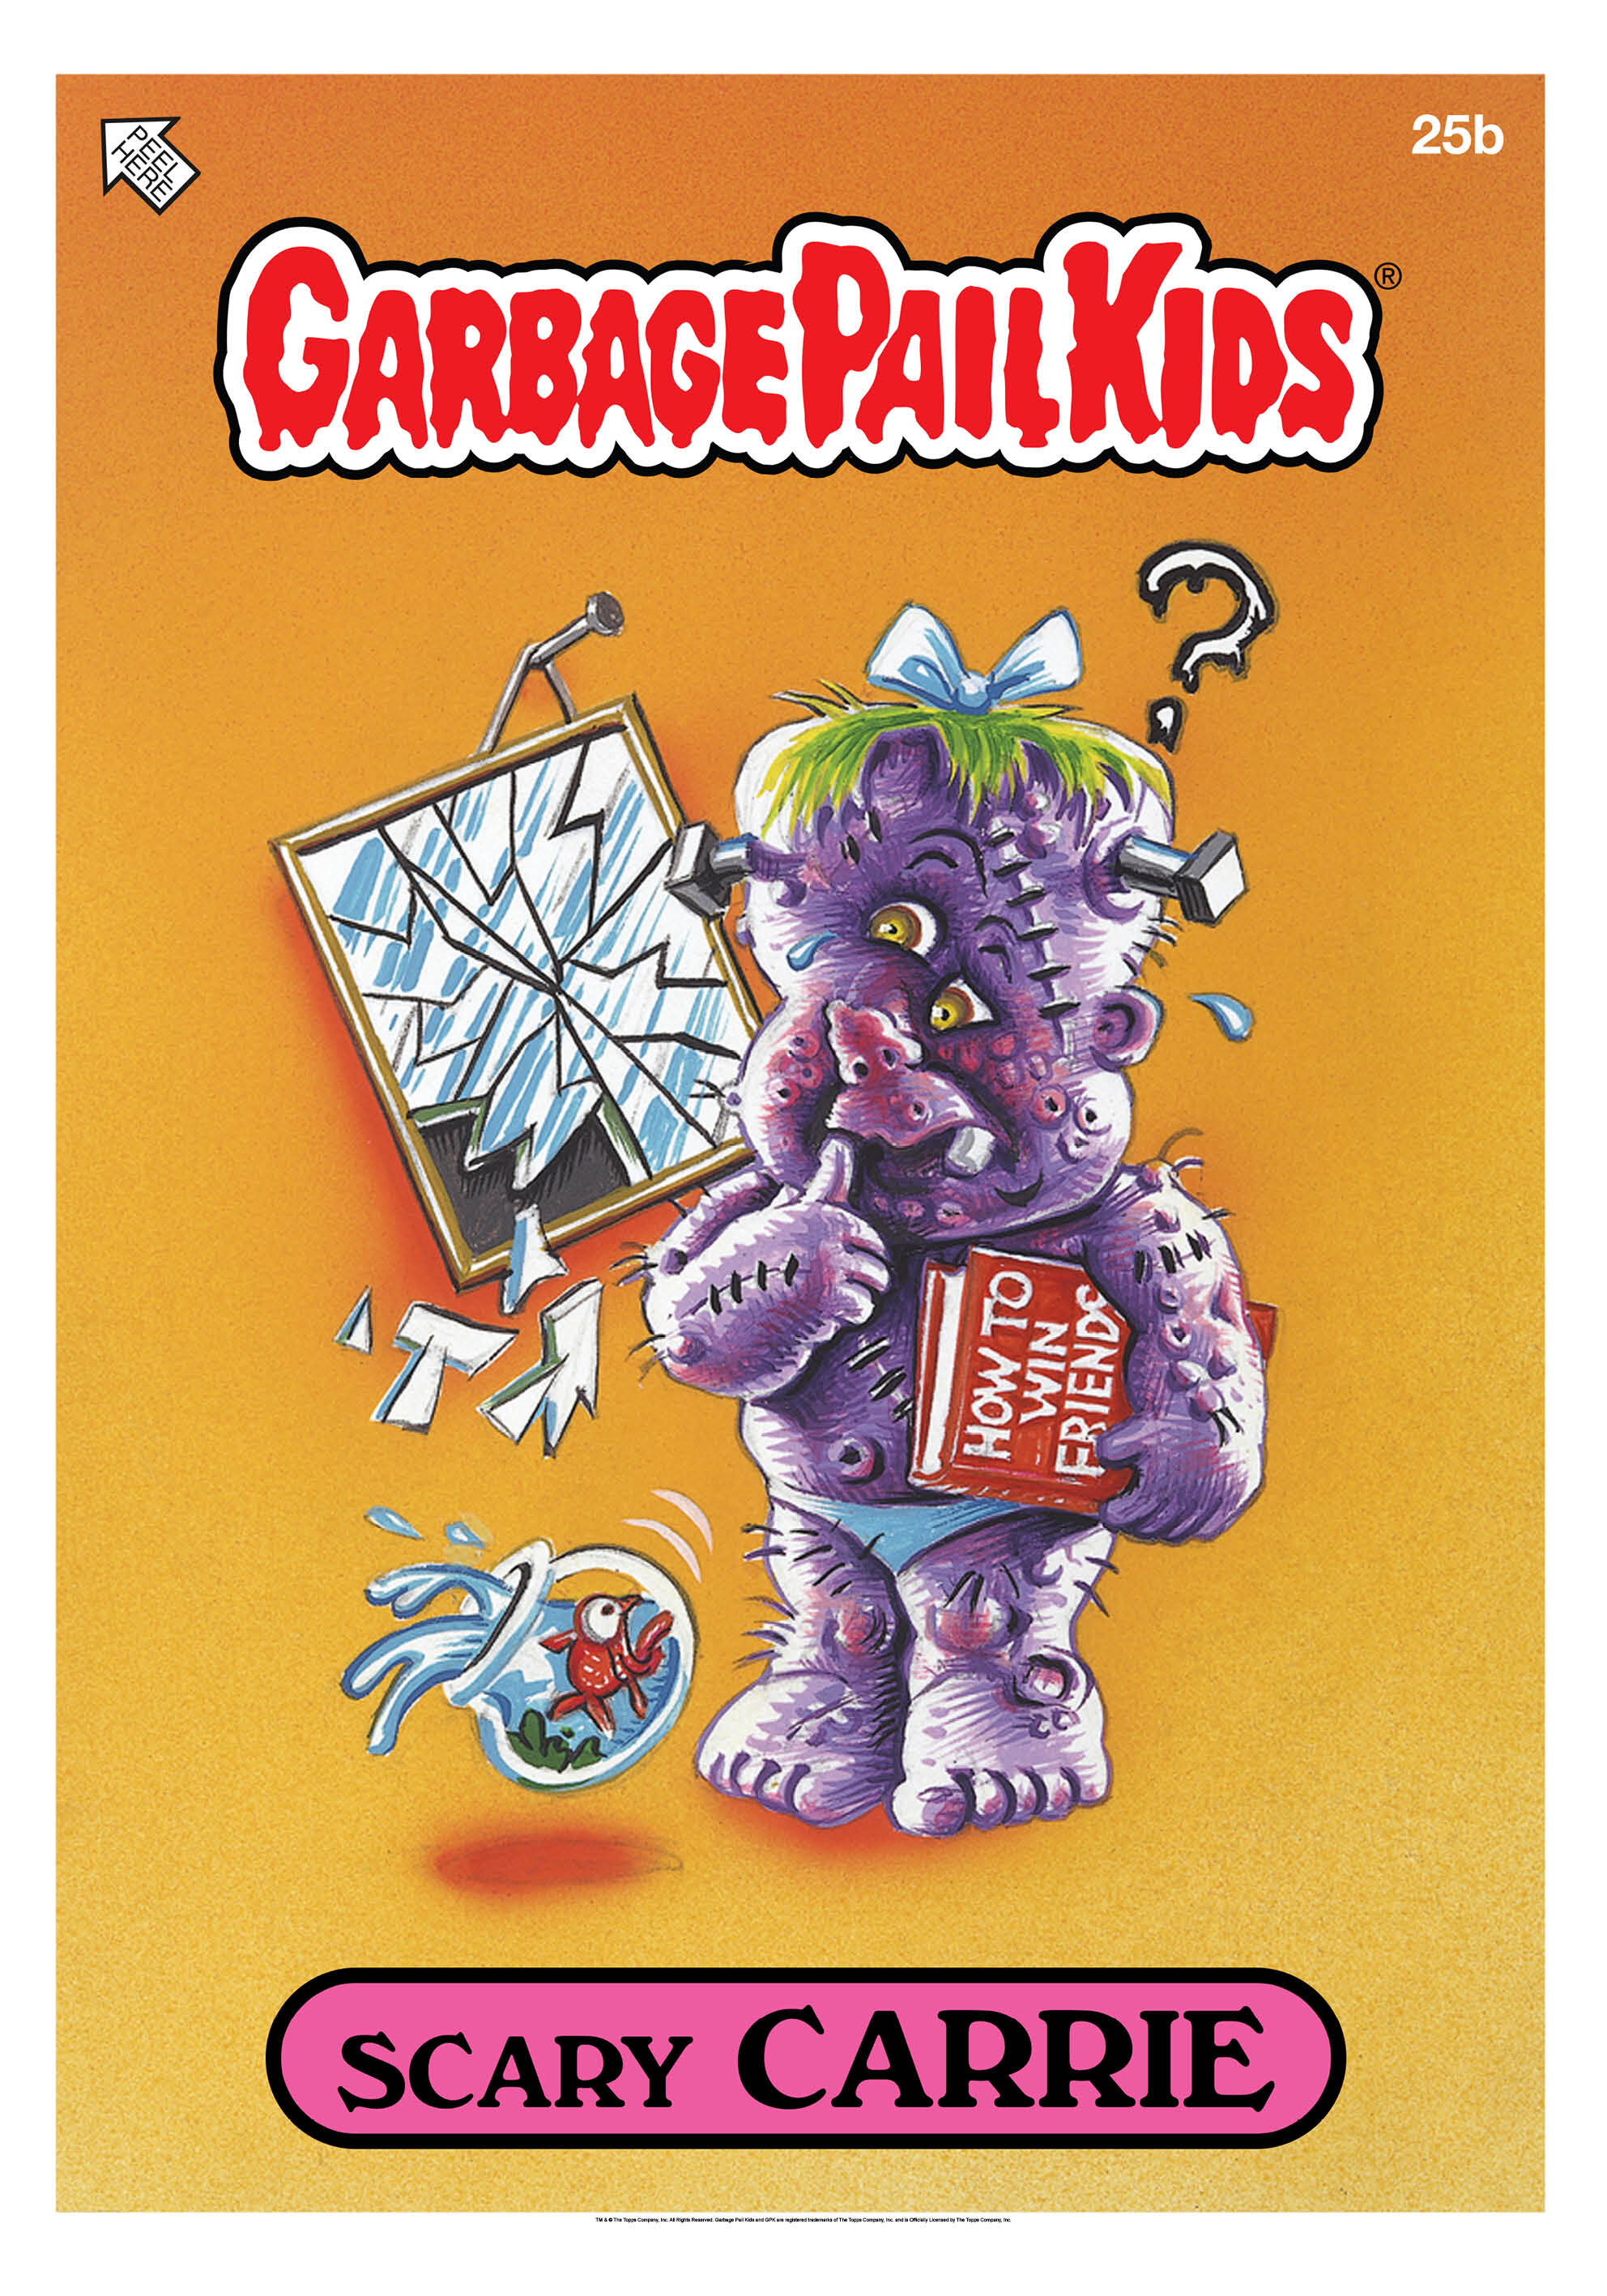 Garbage Pail Kids - Scary Carrie Poster